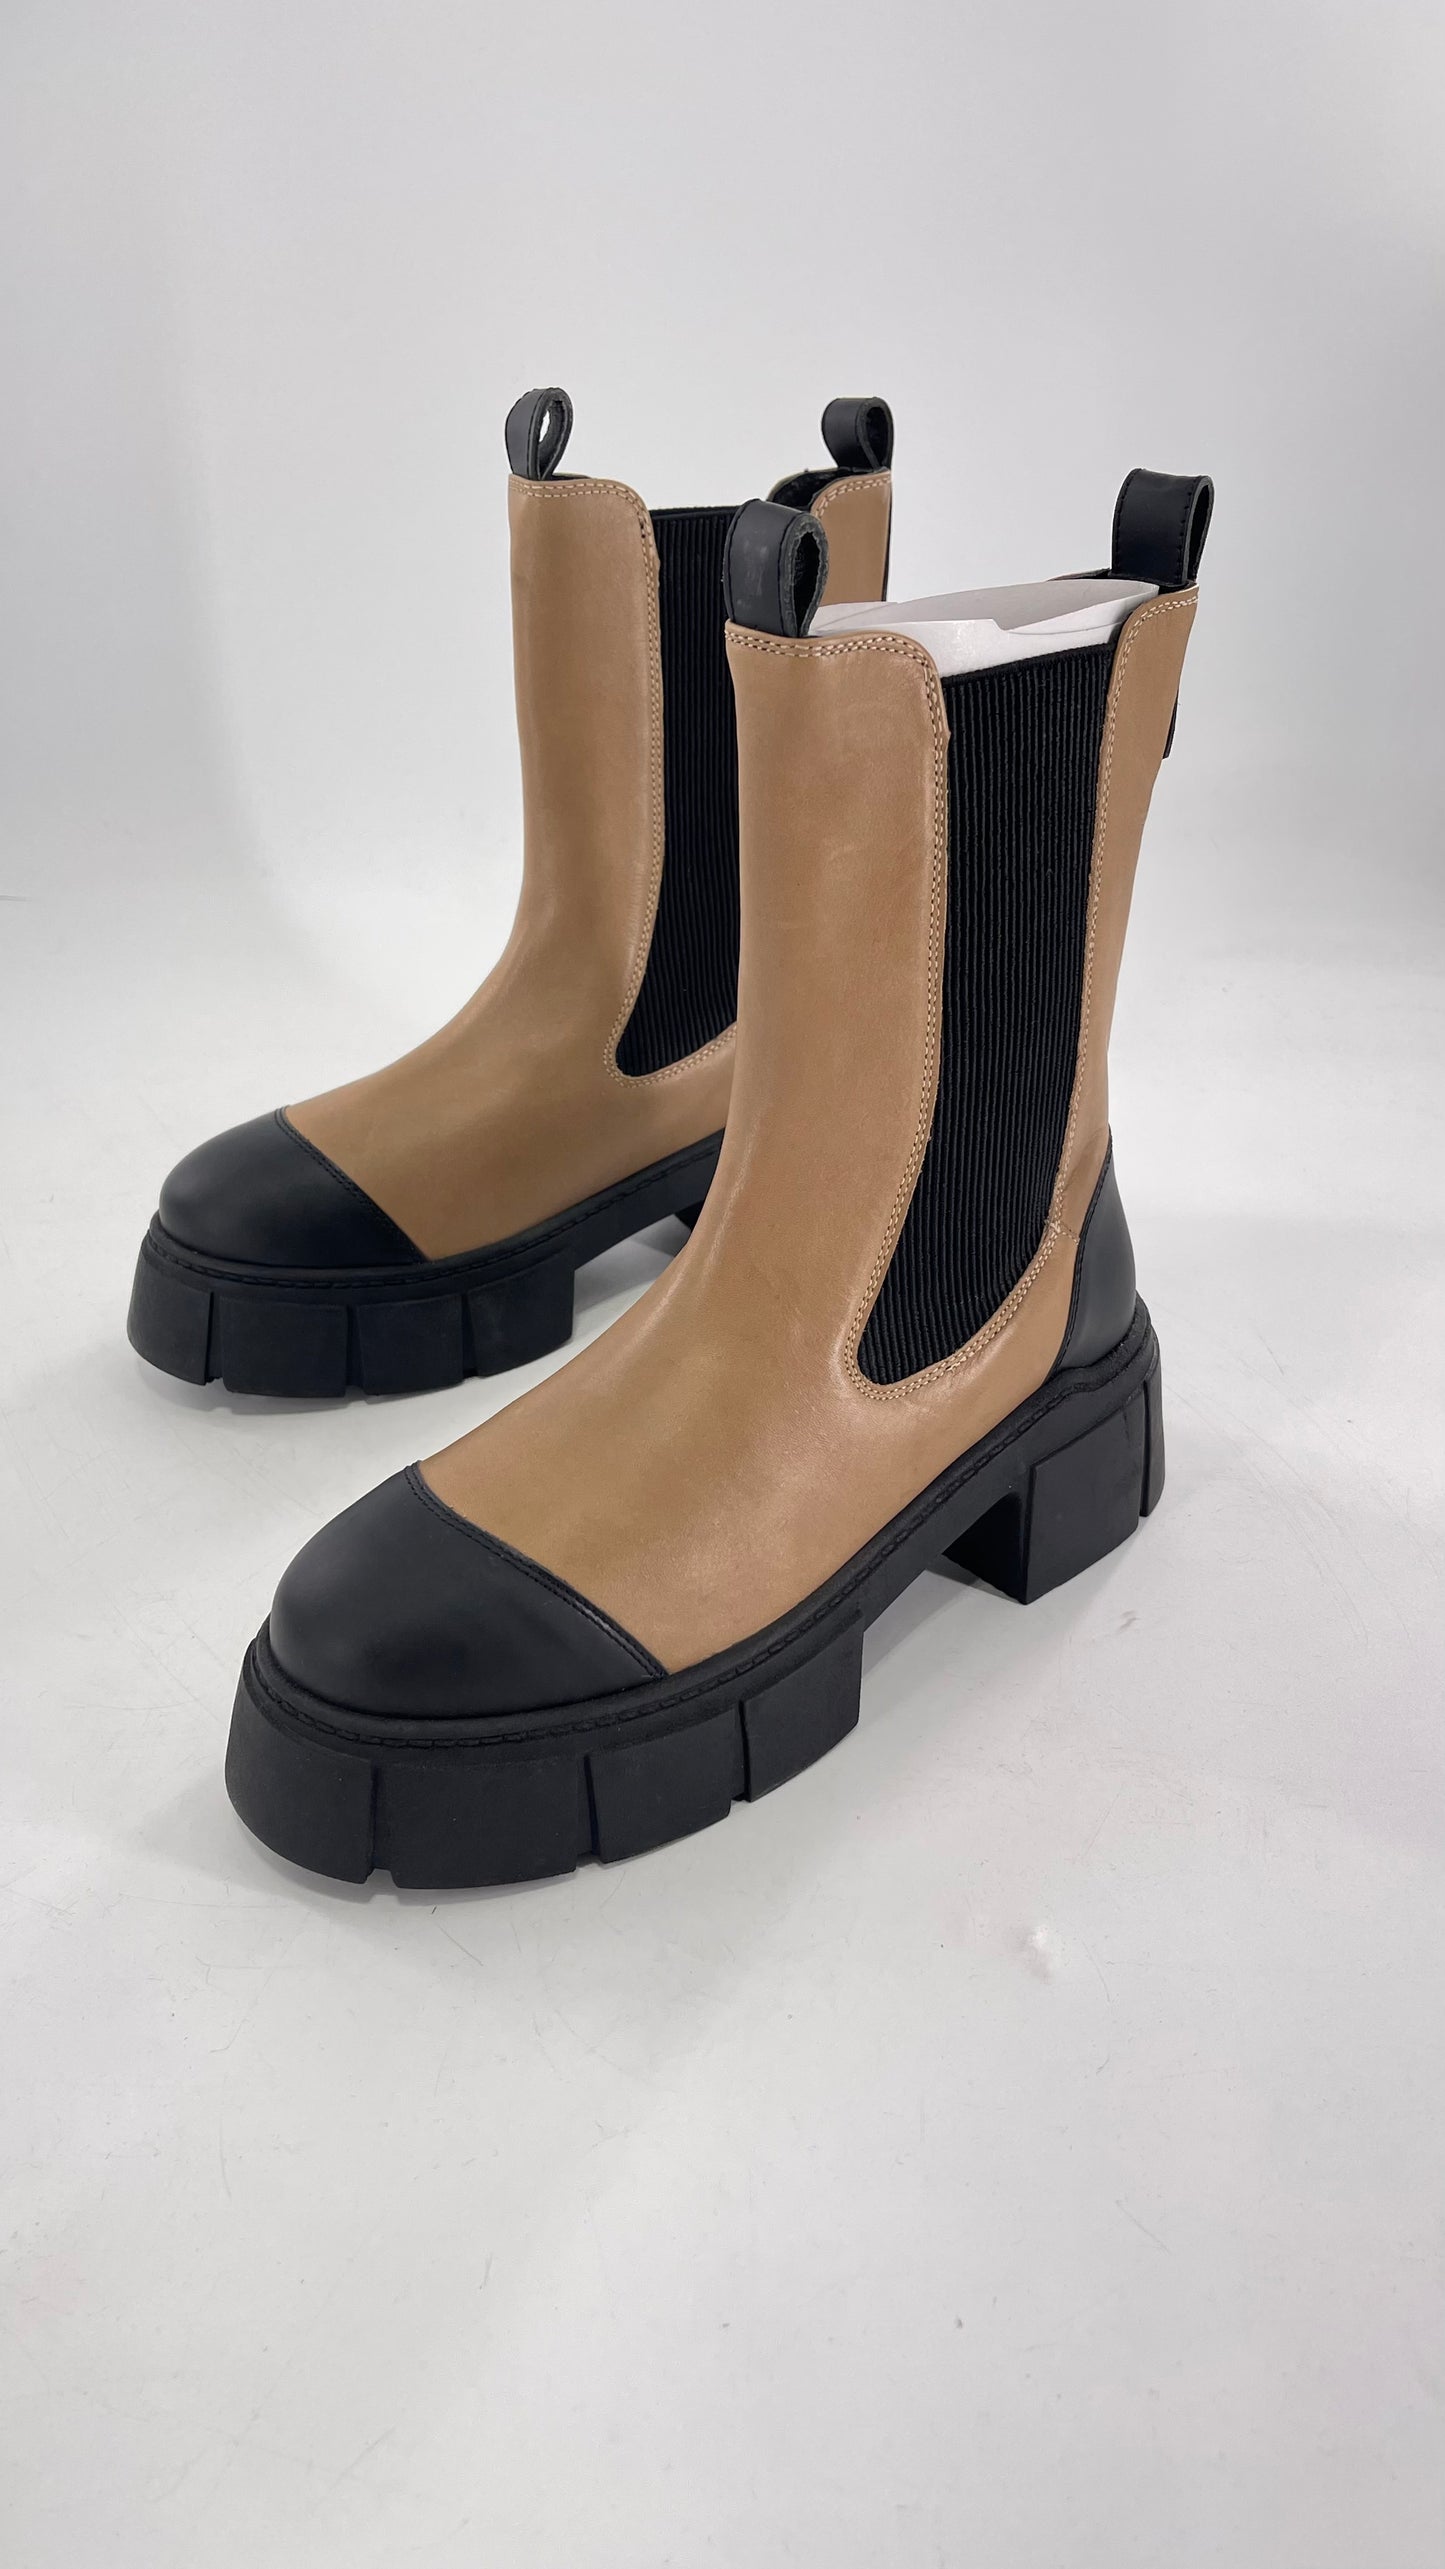 Free People James Chelsea Boot Tan with Chunky Heel and Raised Platform Sole (37.5)